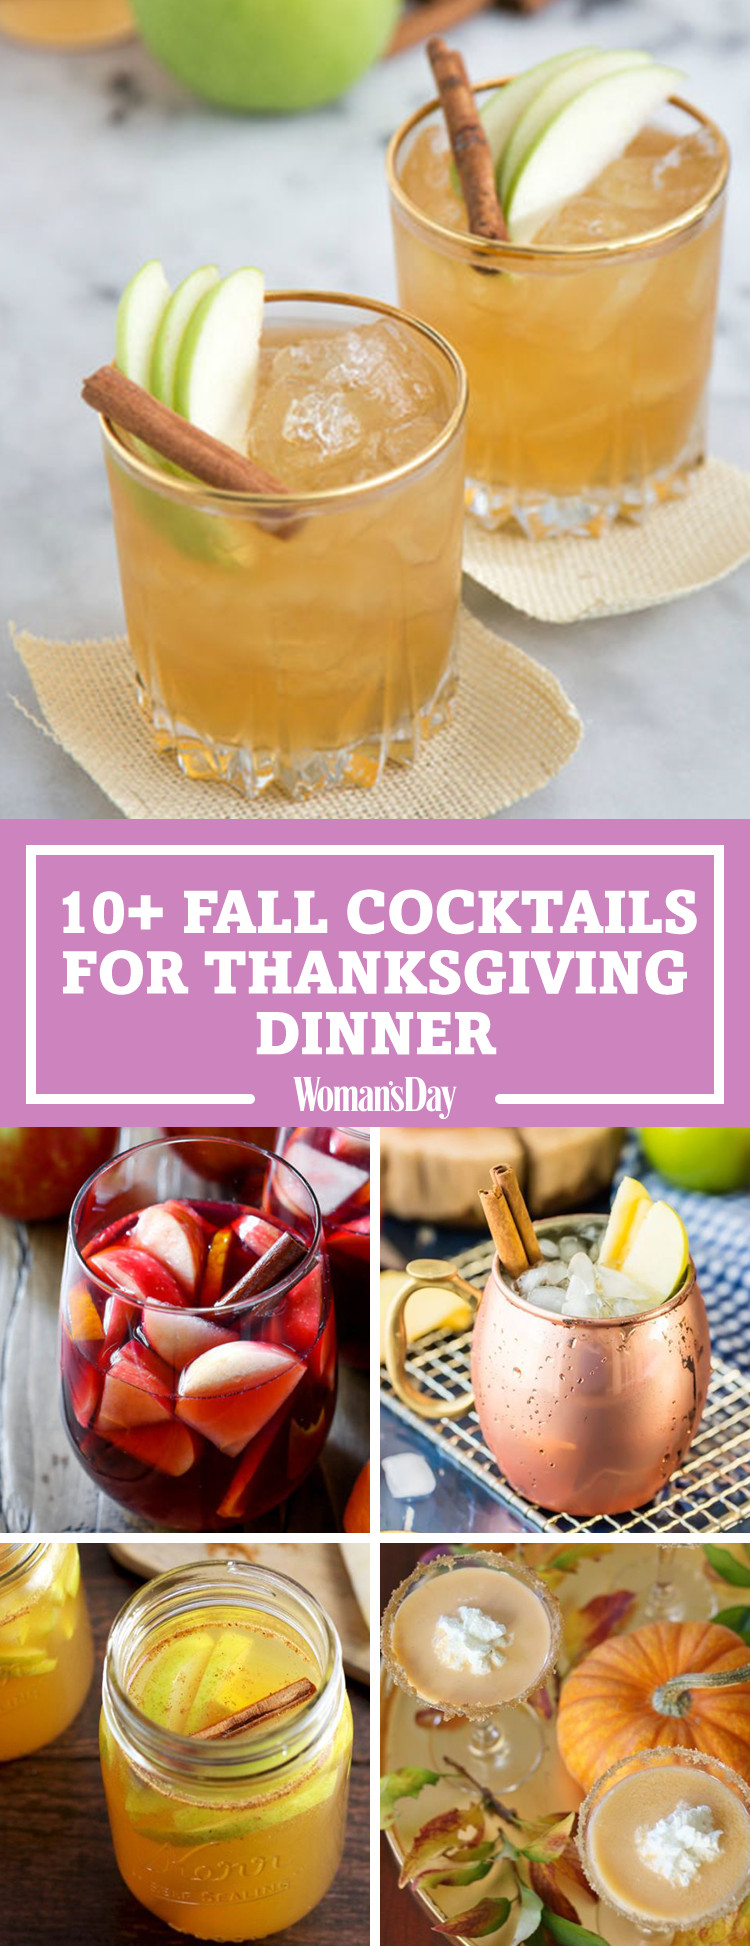 Thanksgiving Mixed Drinks
 14 Best Fall Cocktails for Thanksgiving Recipes for Easy